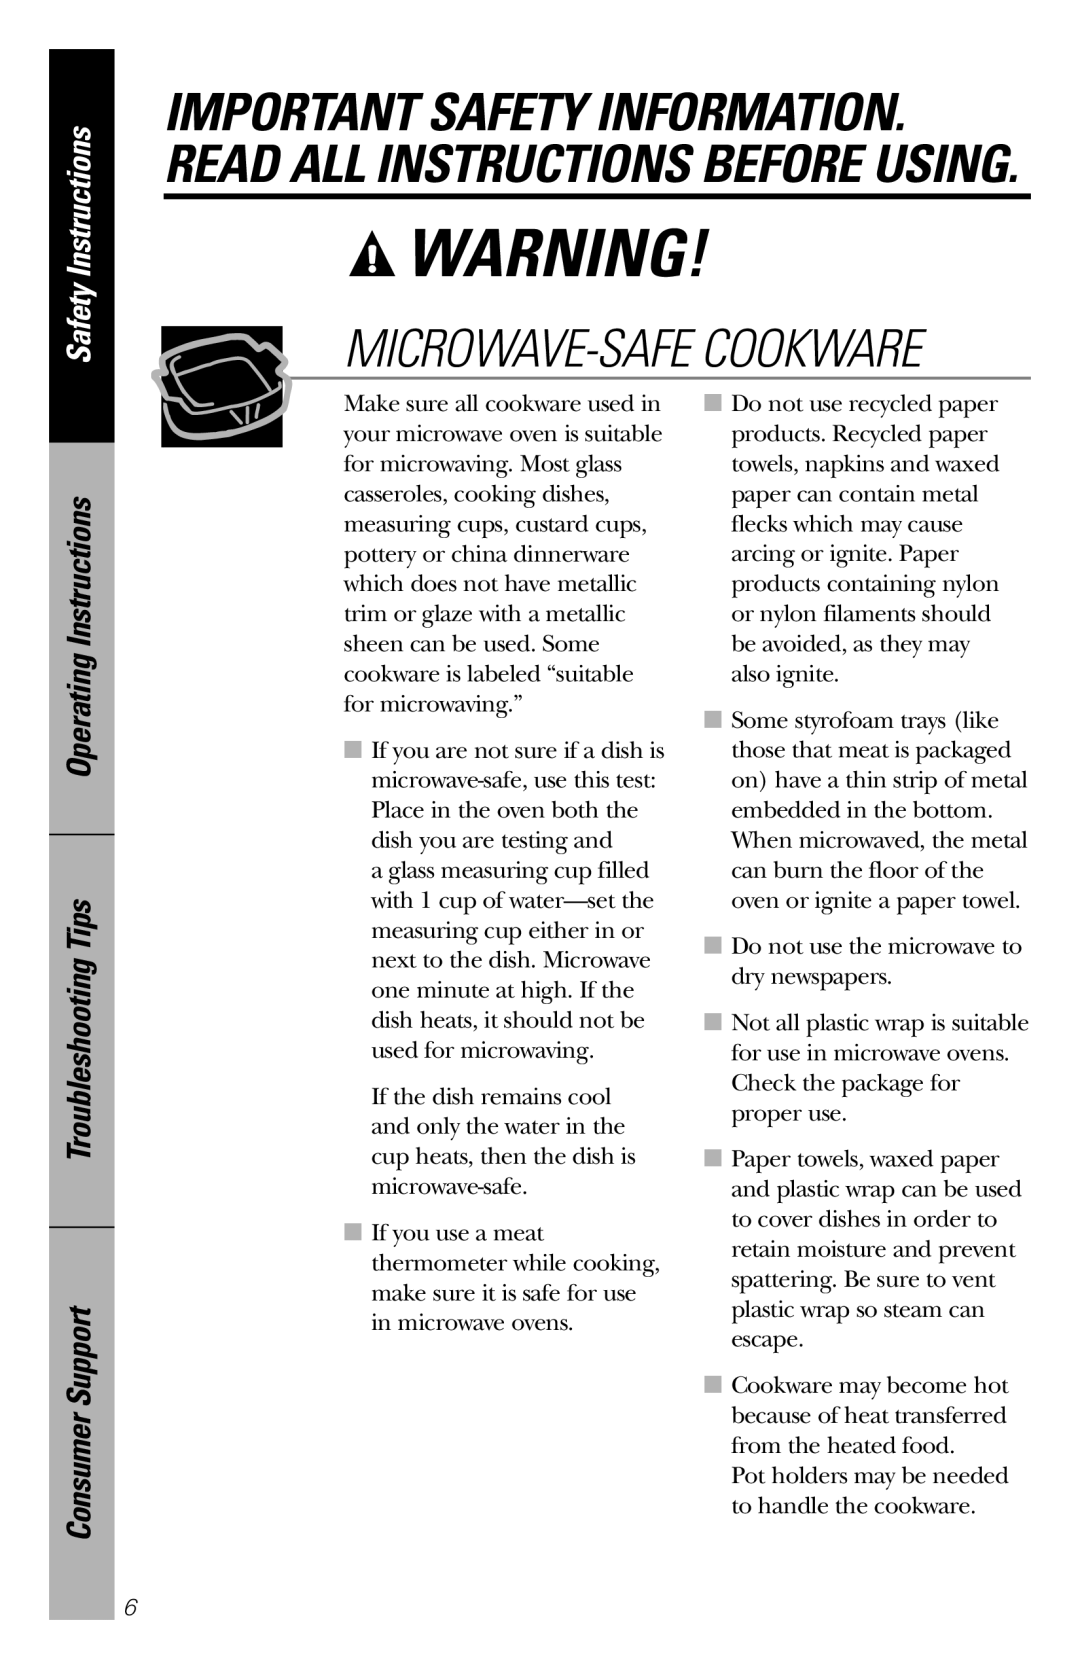 GE REM25 Microwave-Safe Cookware, Operating Instructions Troubleshooting Tips Consumer Support, Safety Instructions 